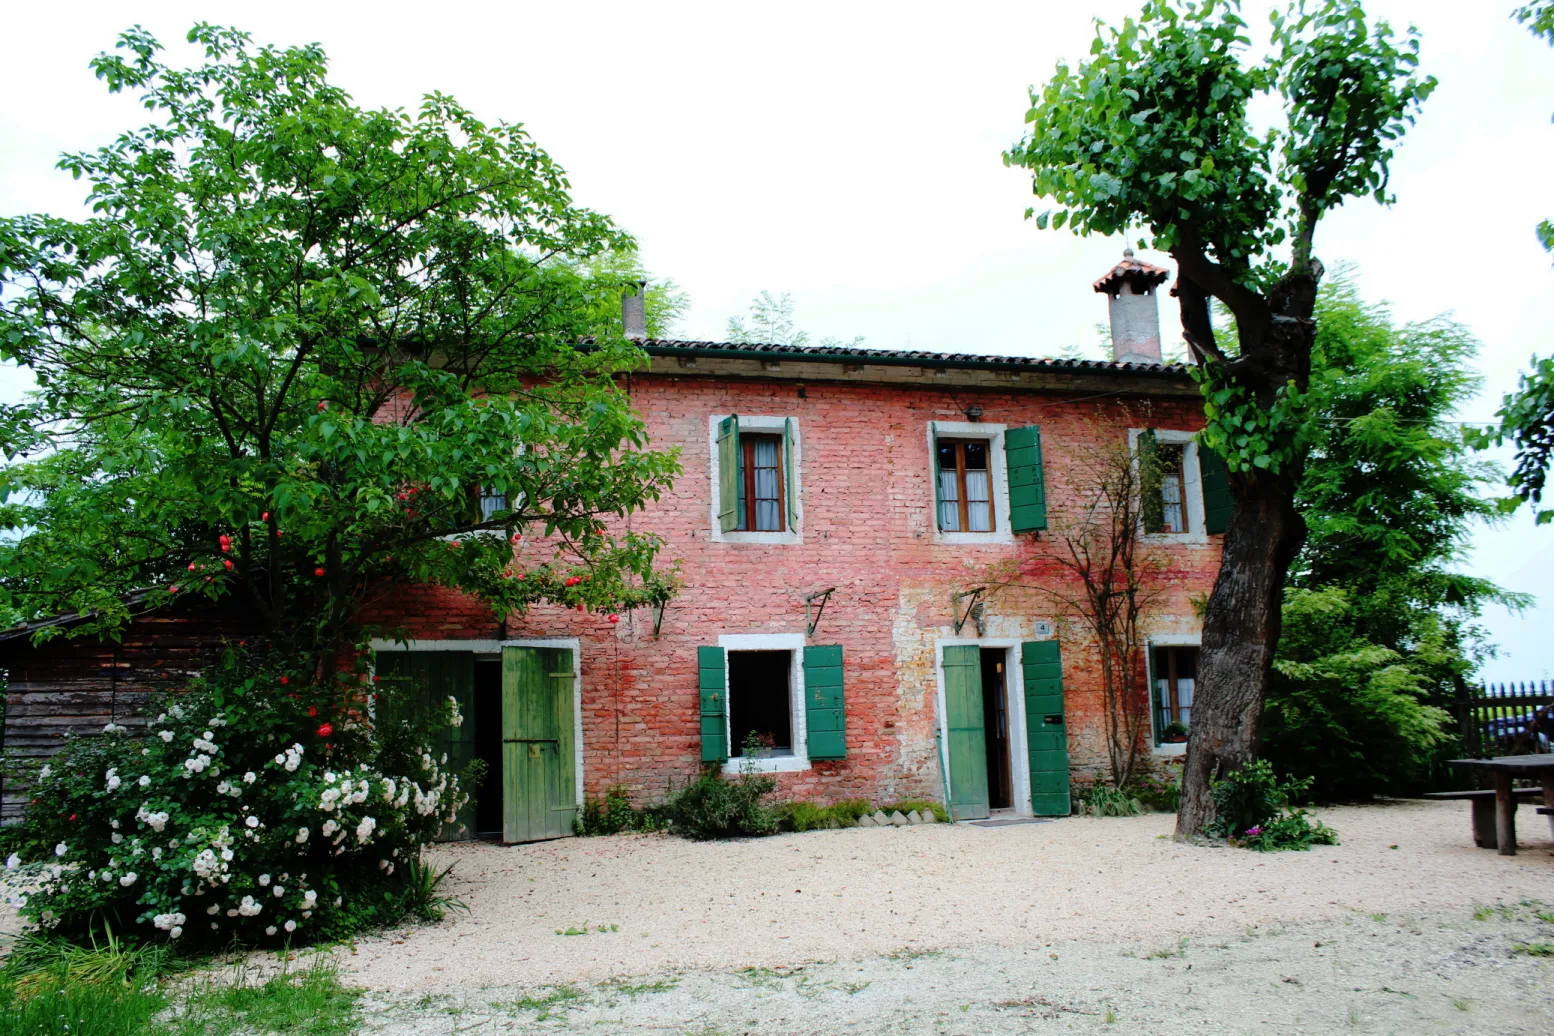 Photo showing: Last home of Goffredo Parise, called "House of the fairies". The house is located in Gonfo of the Piave River, Salgareda (Italy).